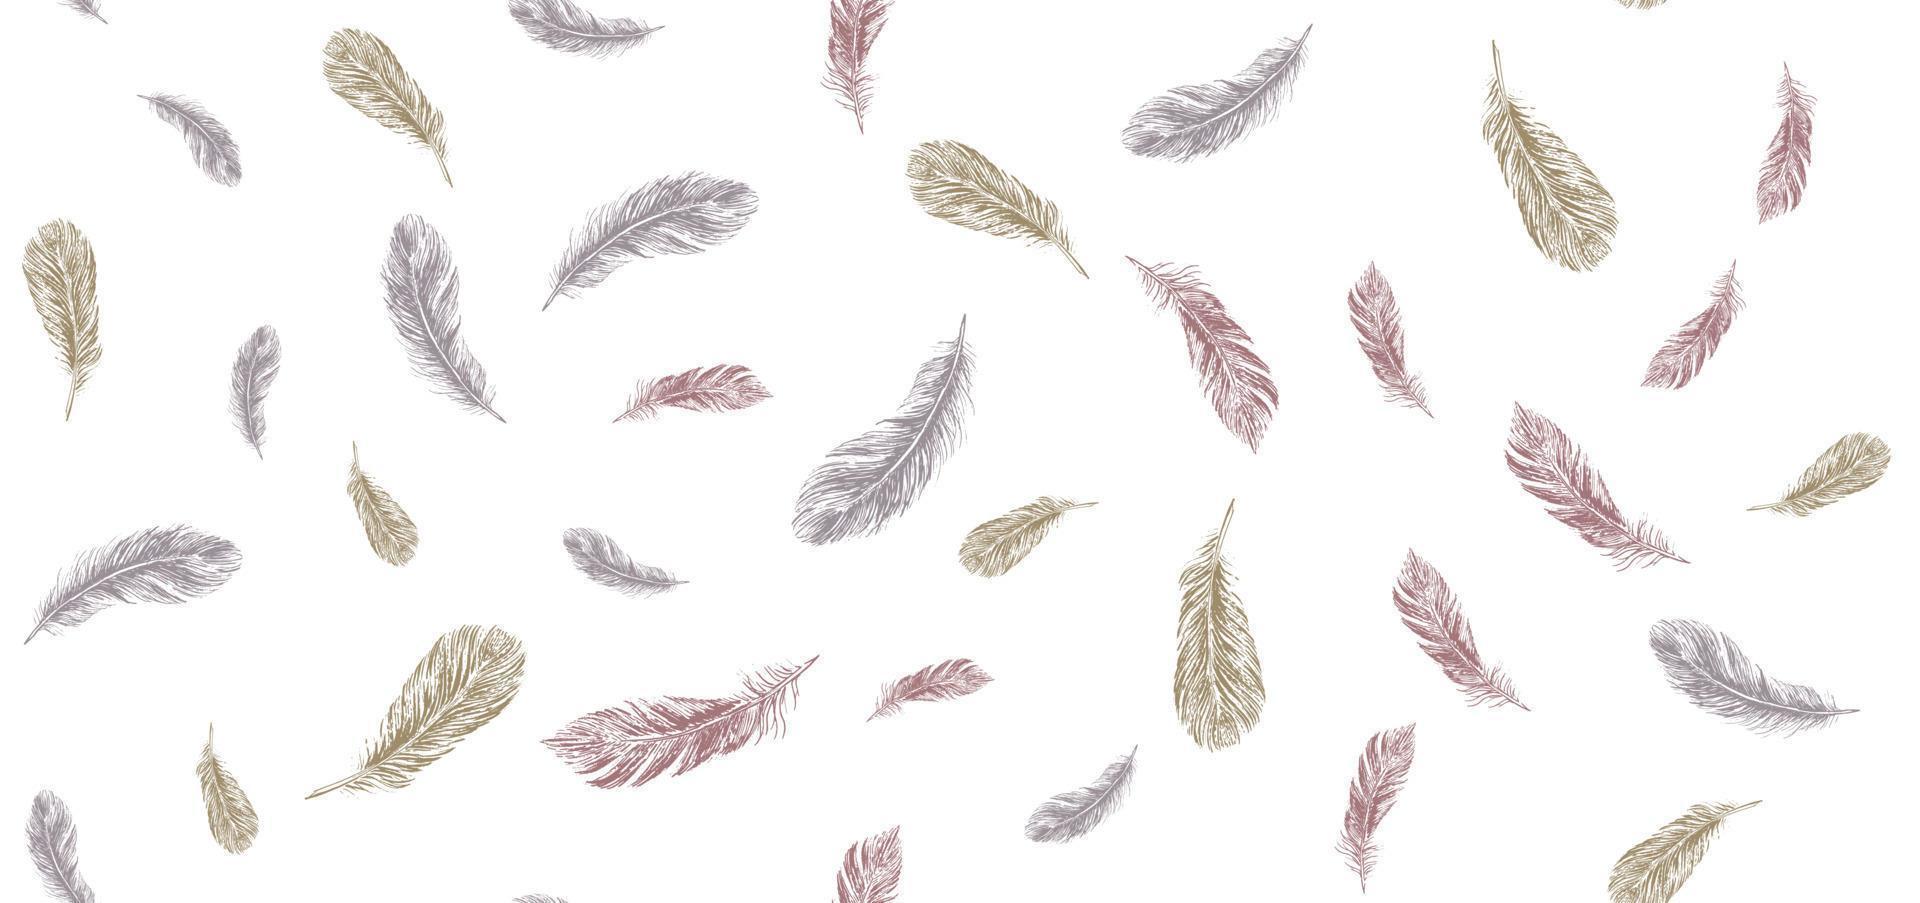 Set of bird feathers. Hand drawn sketch style. vector